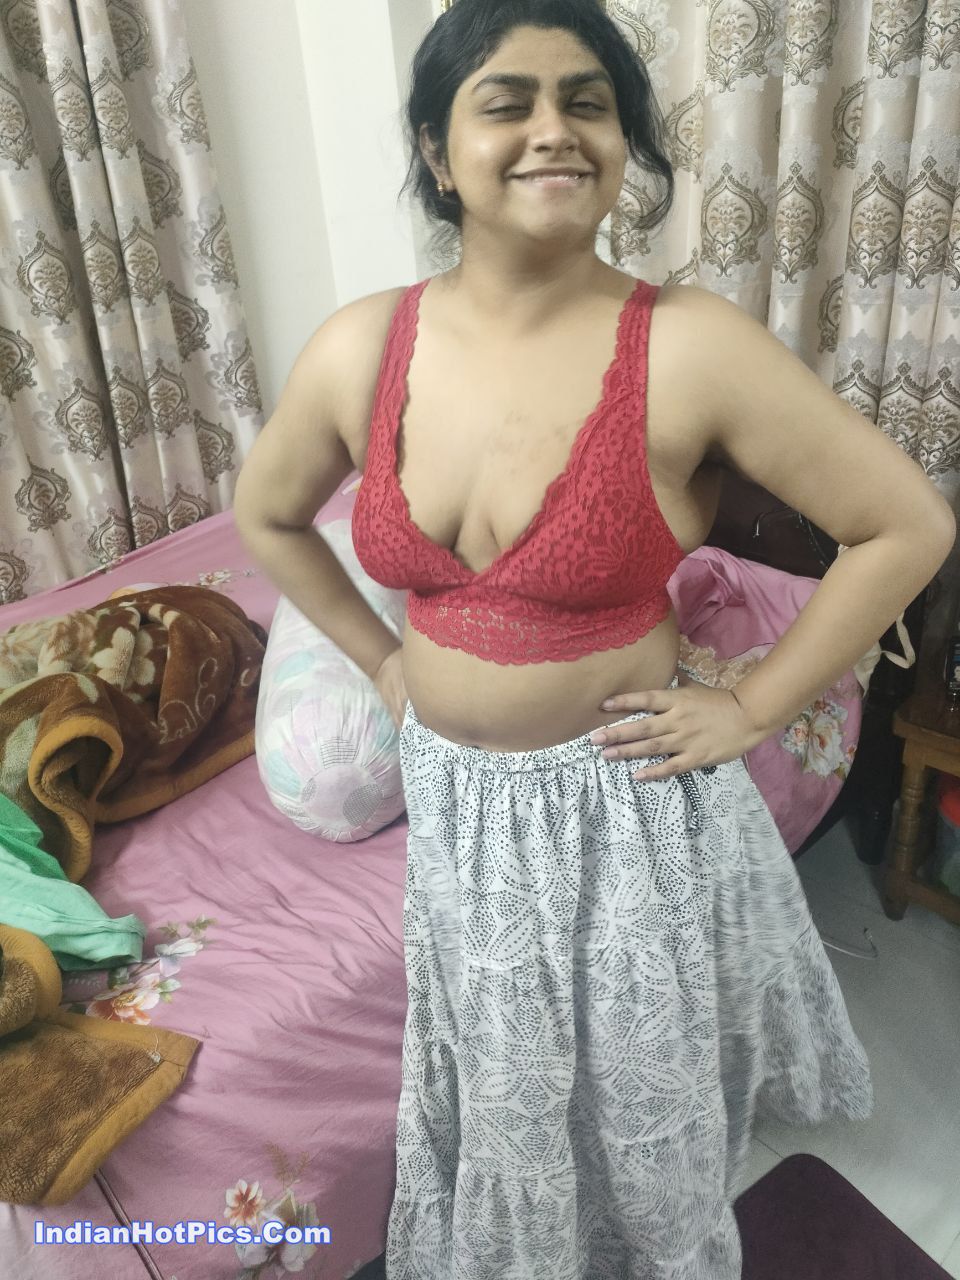 Indian Wife Nude And Sex Honeymoon Photos photo picture